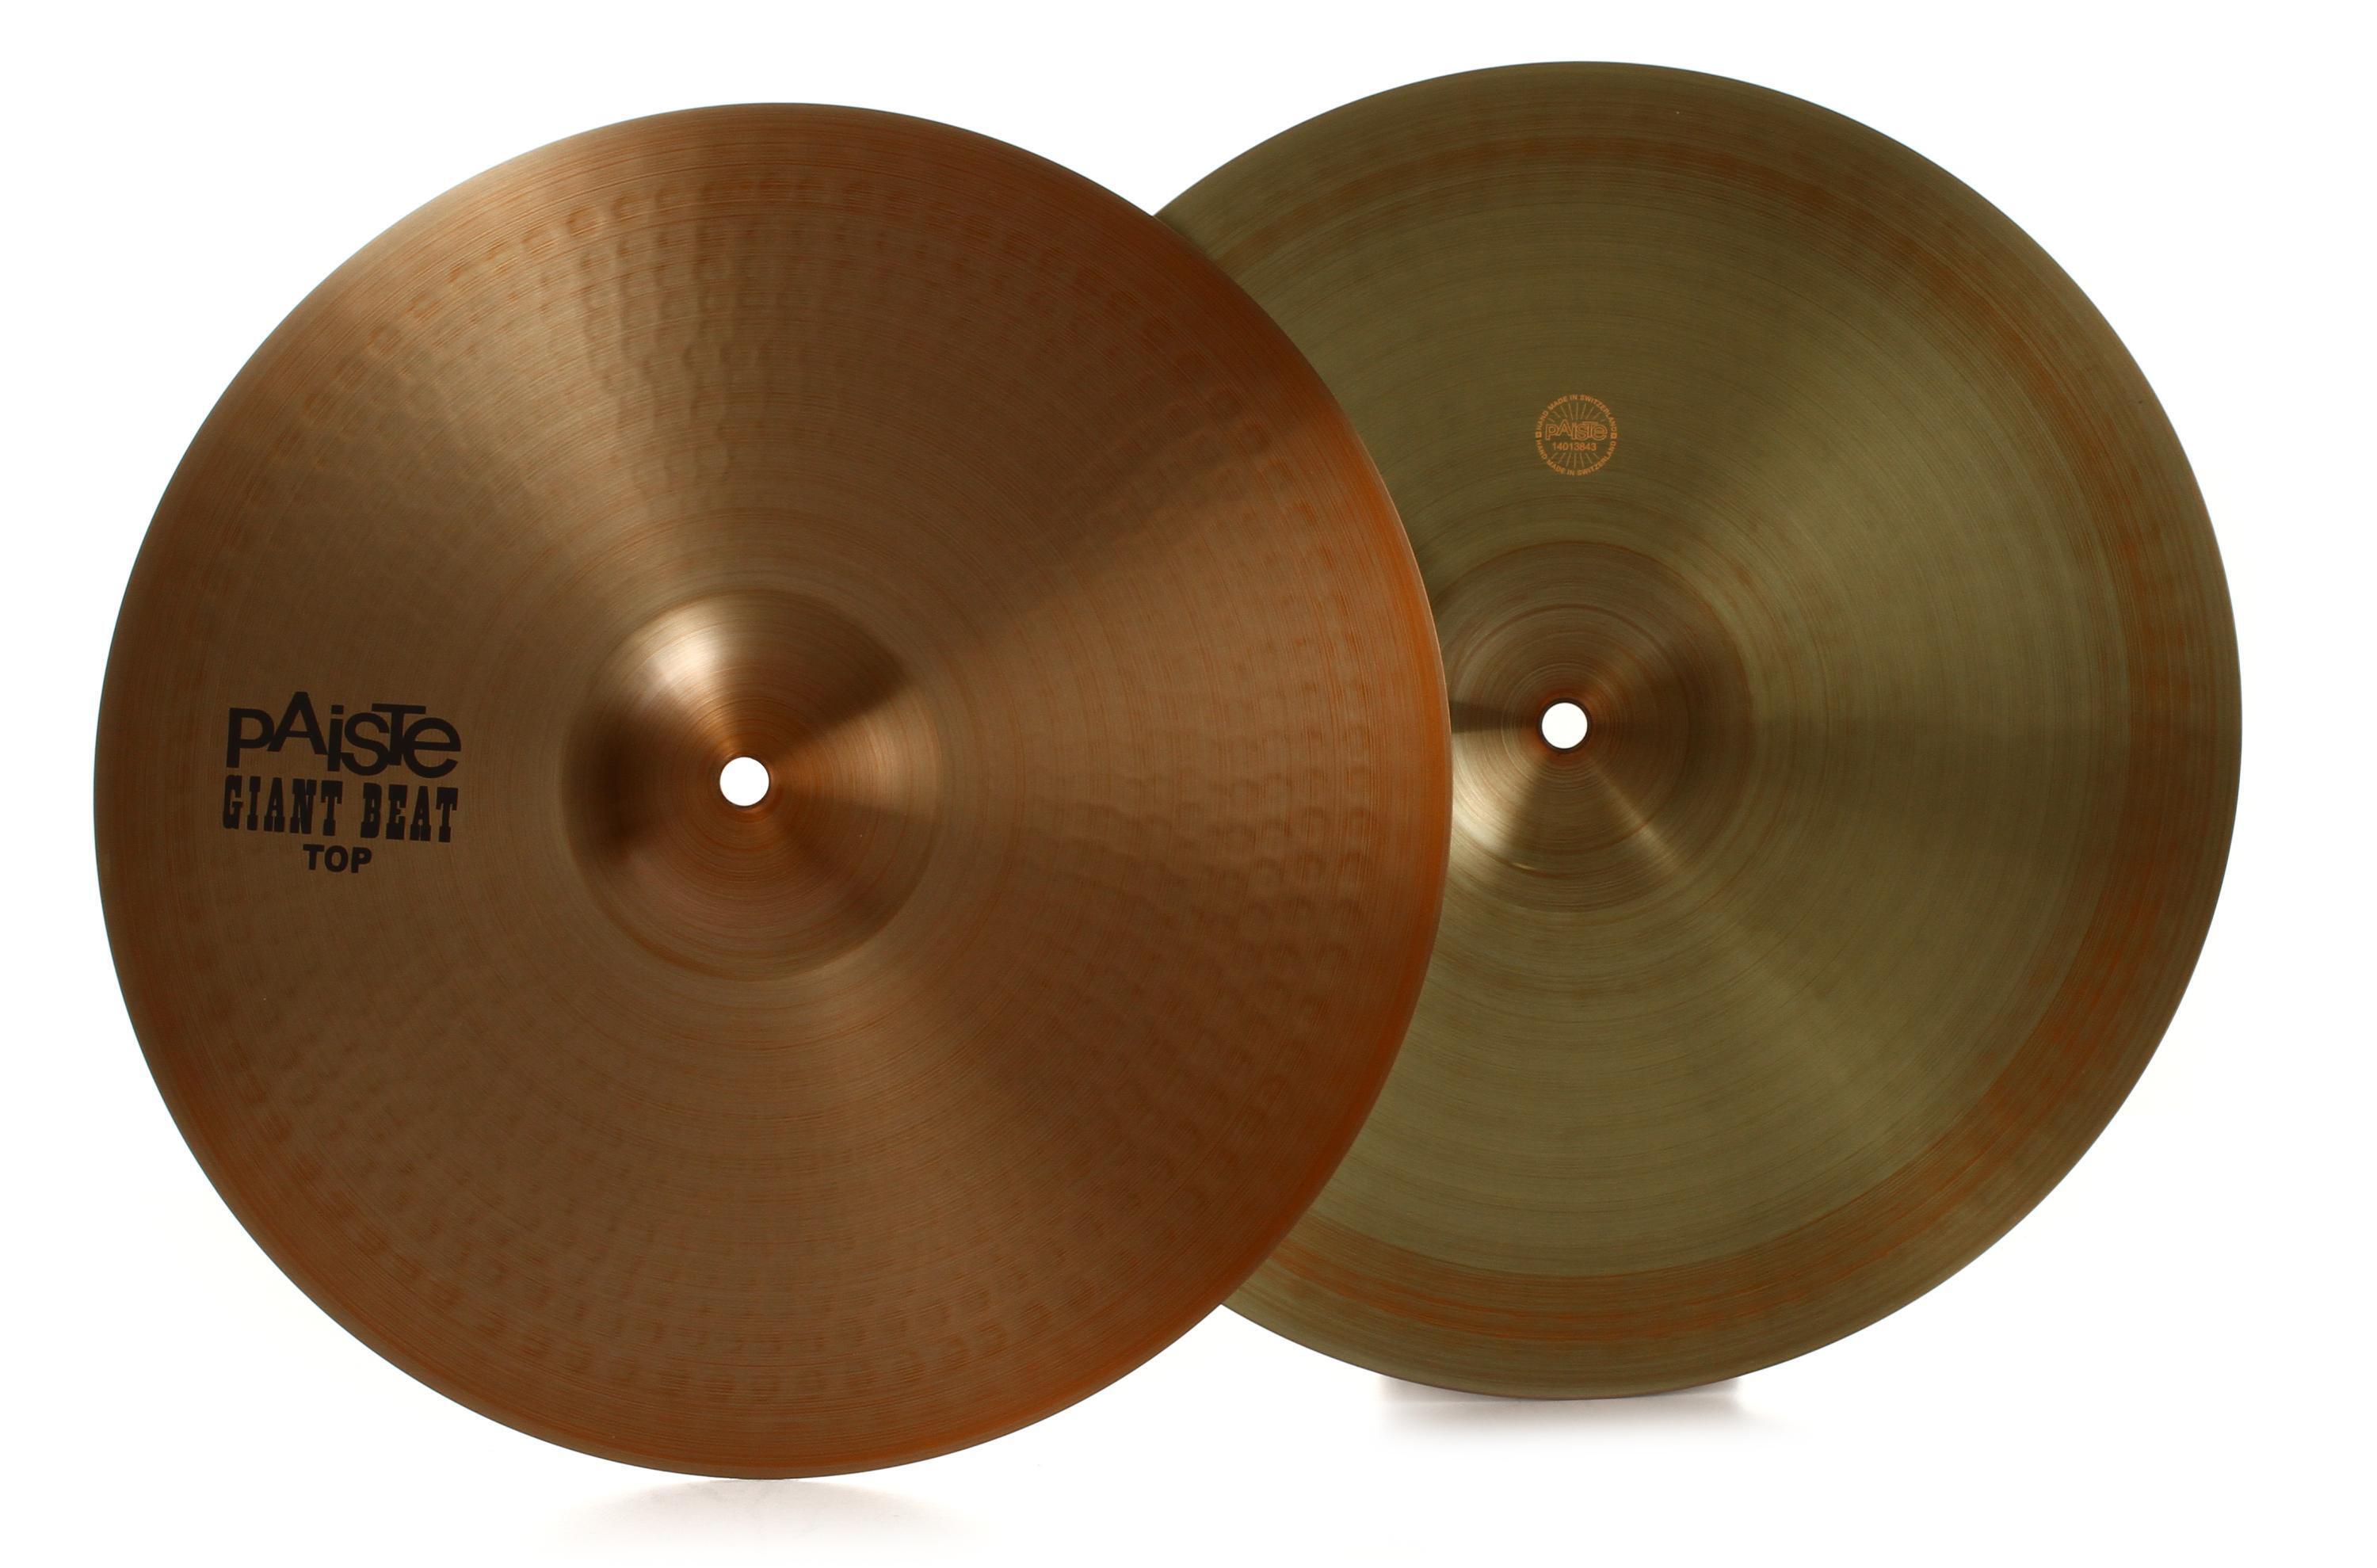 Paiste 15 inch Giant Beat Hi-hat Cymbals | Sweetwater